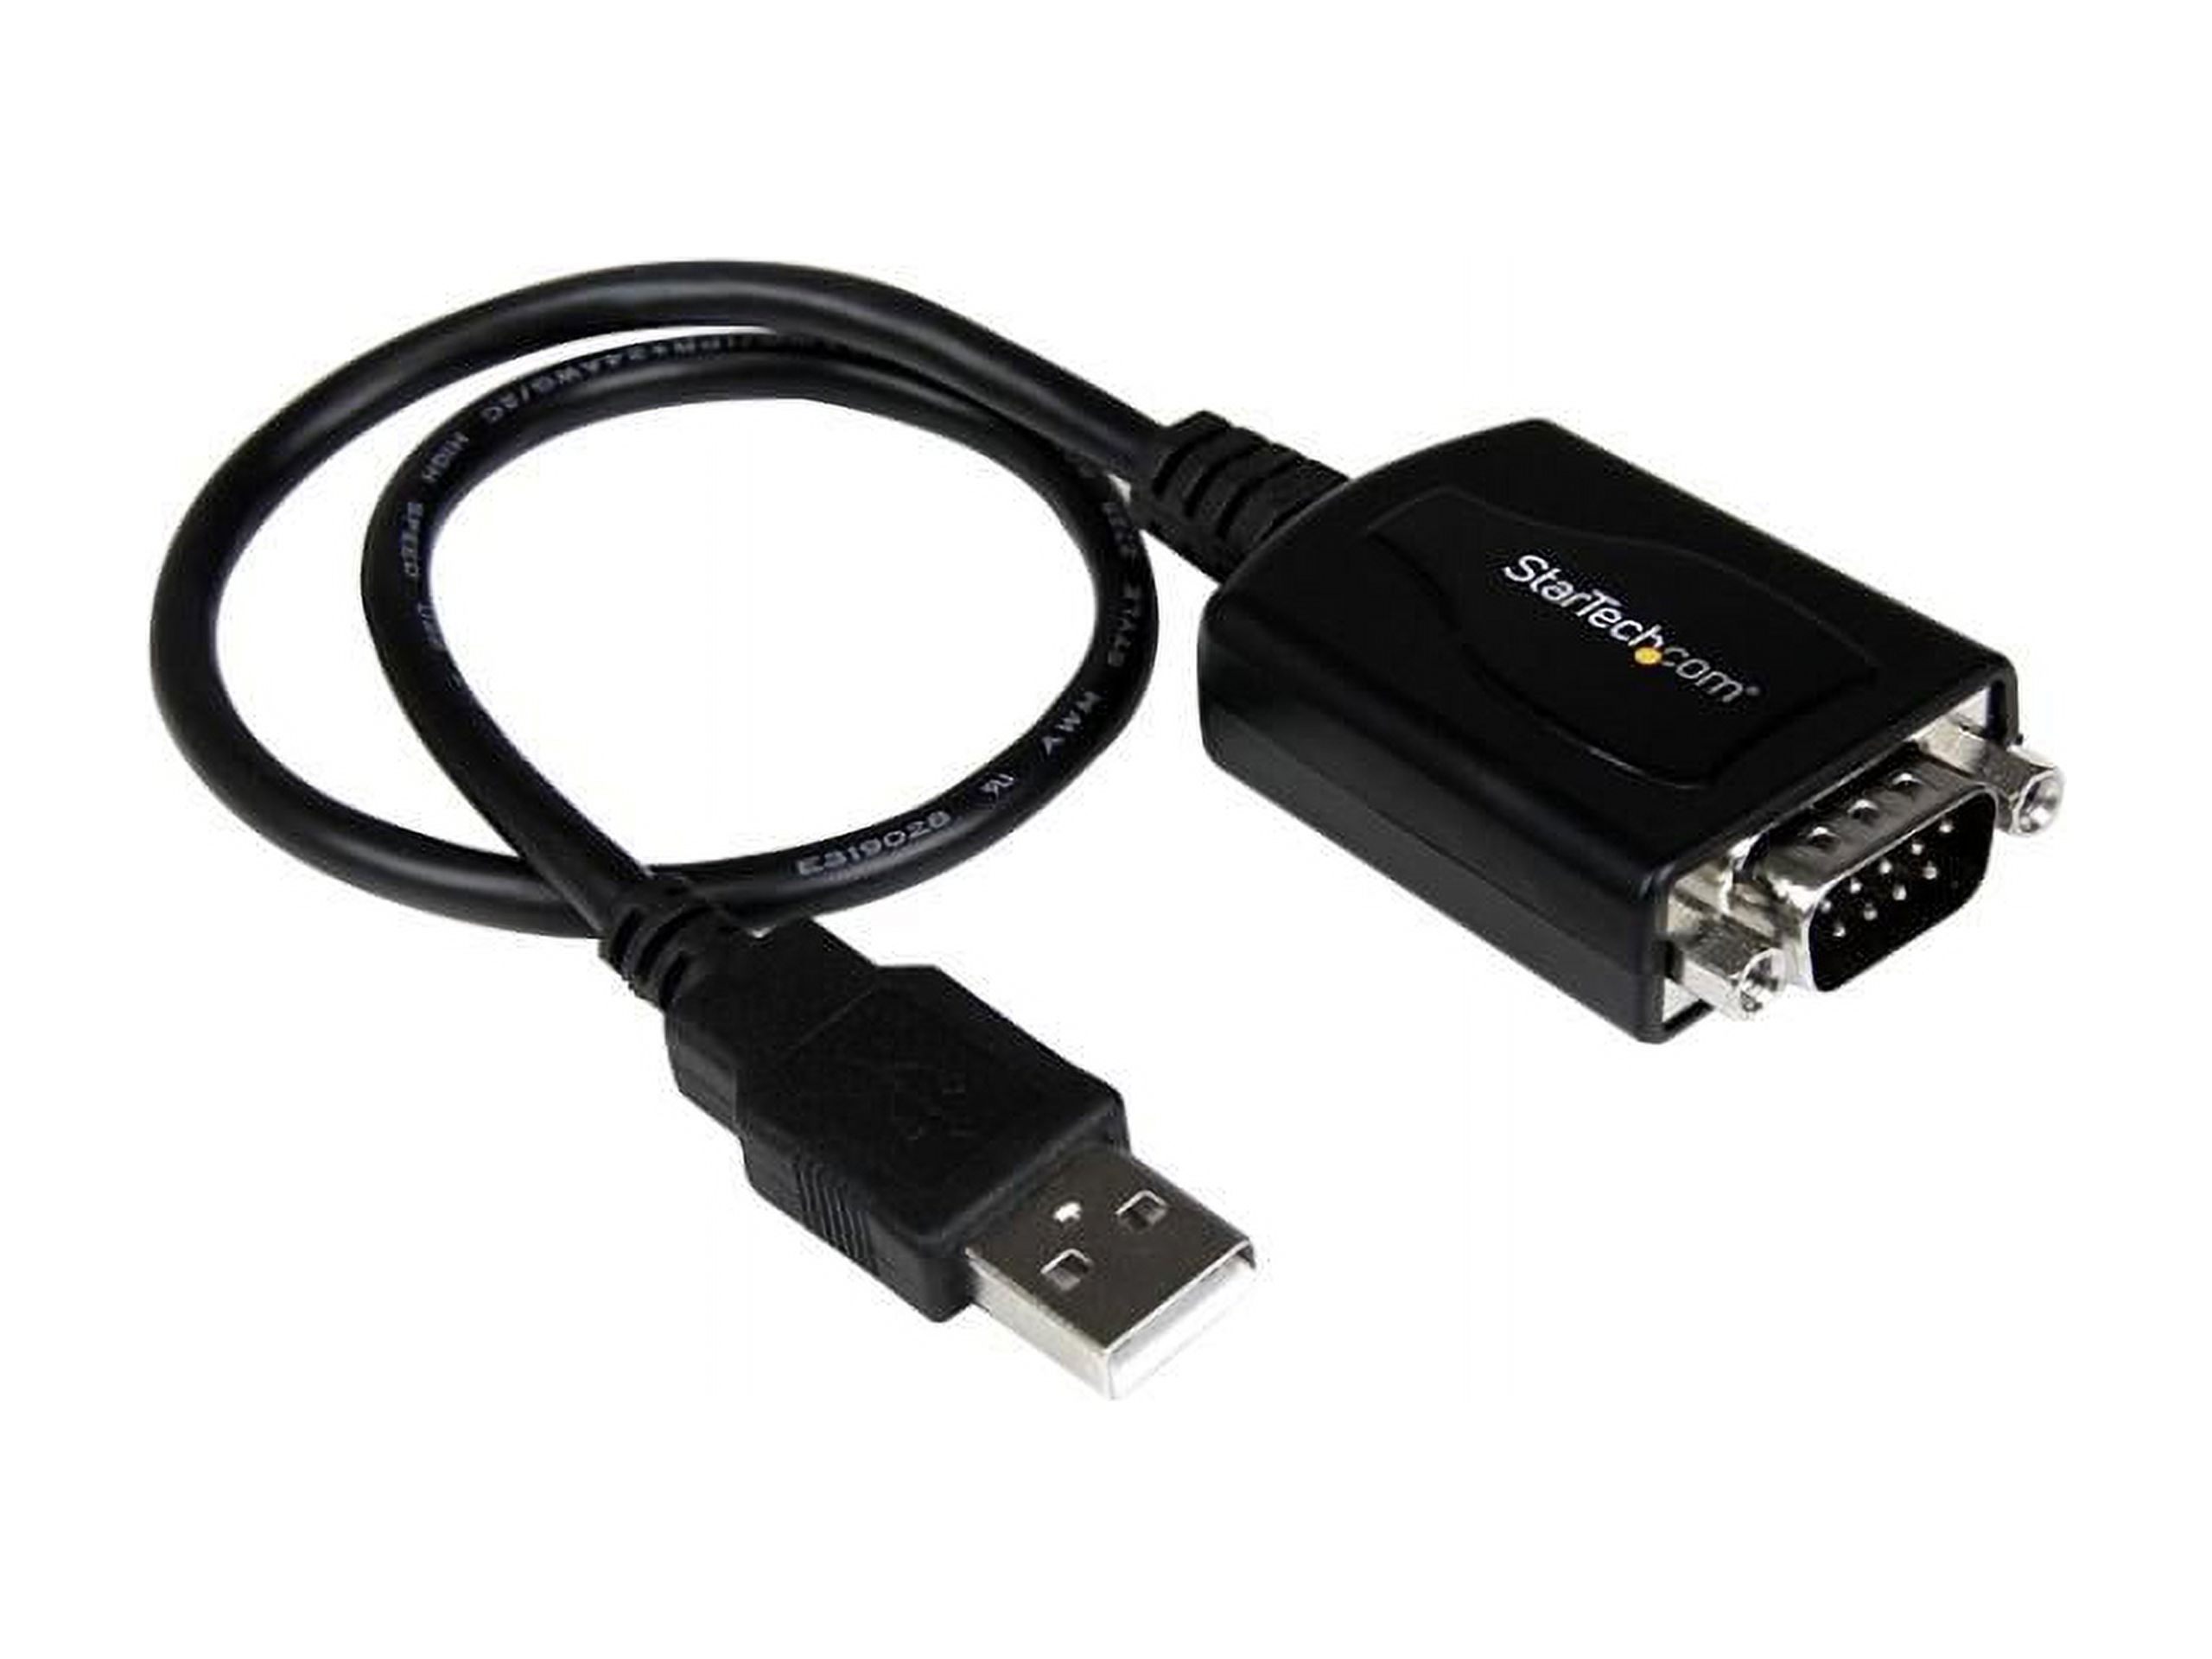 StarTech.com ICUSB232PRO USB to Serial Adapter - Prolific PL-2303 - COM Port Retention - USB to RS232 Adapter Cable - USB Serial - image 1 of 4